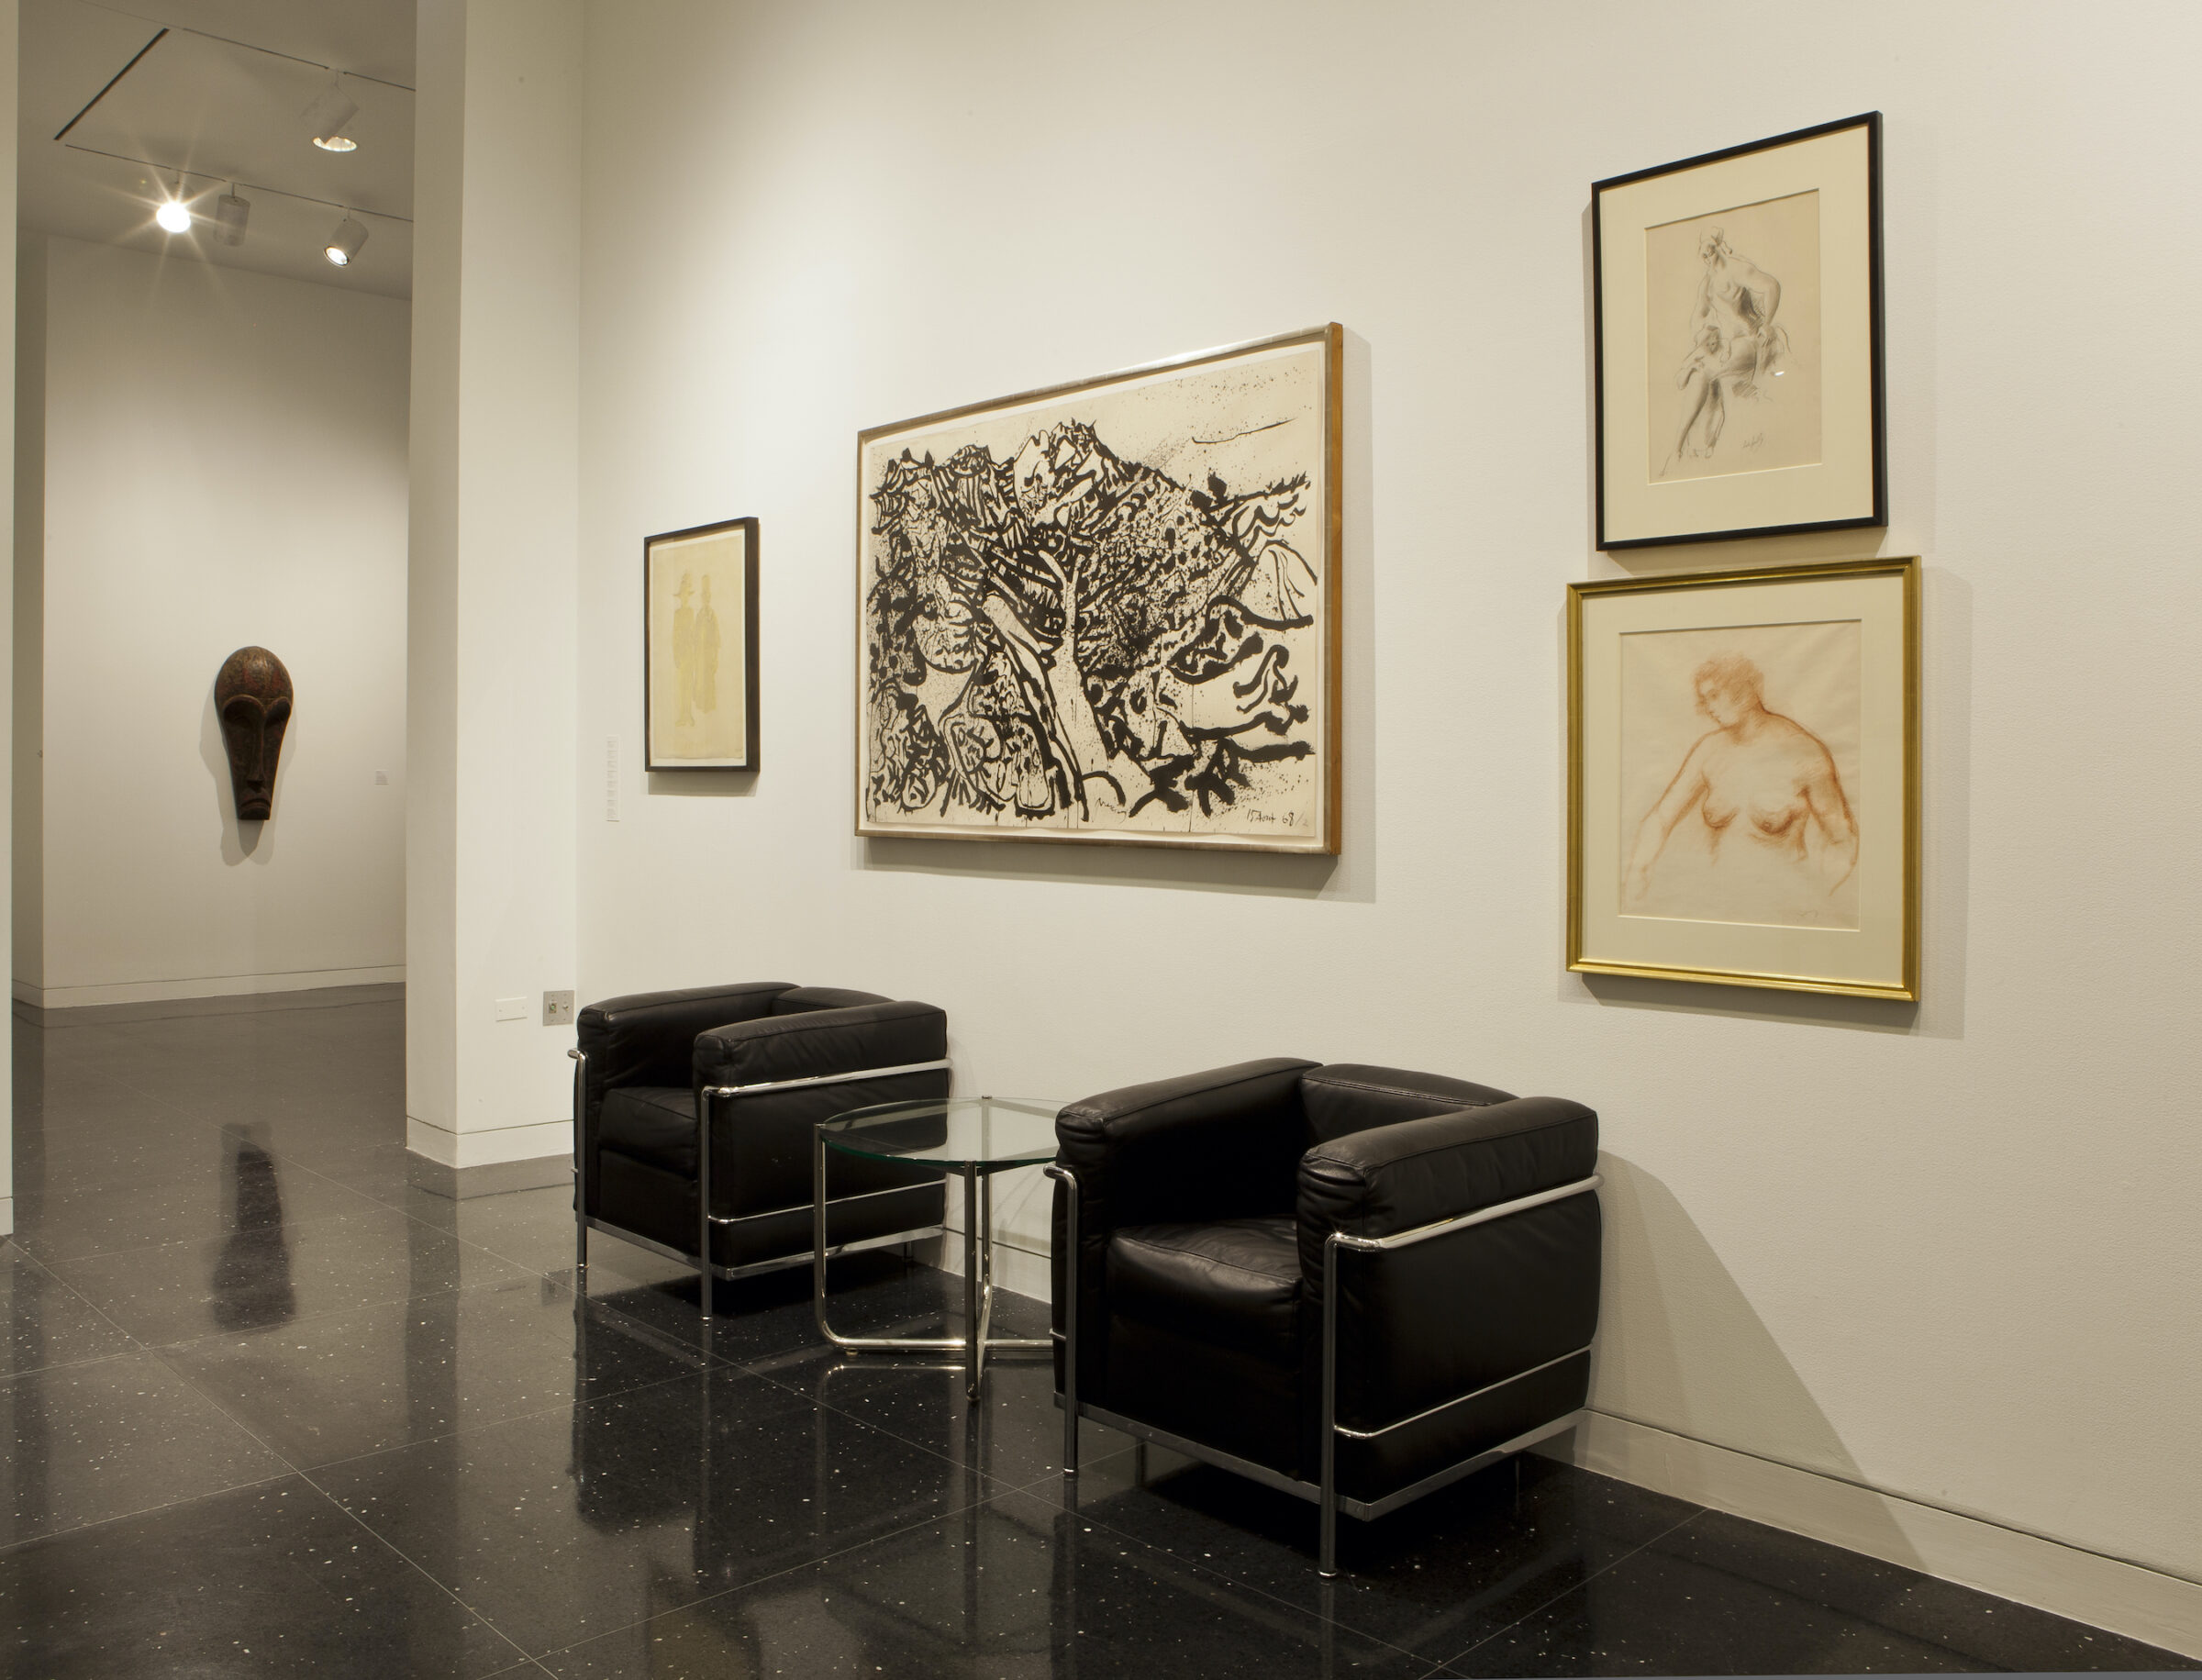 Two square-shaped cushioned arm chairs separated by a glass top table sit against a white gallery wall. Hanging on the wall between the two chairs is an abstract painting of black forms by Pierre Alechinsky. On either side of the painting are a series of framed sketches.